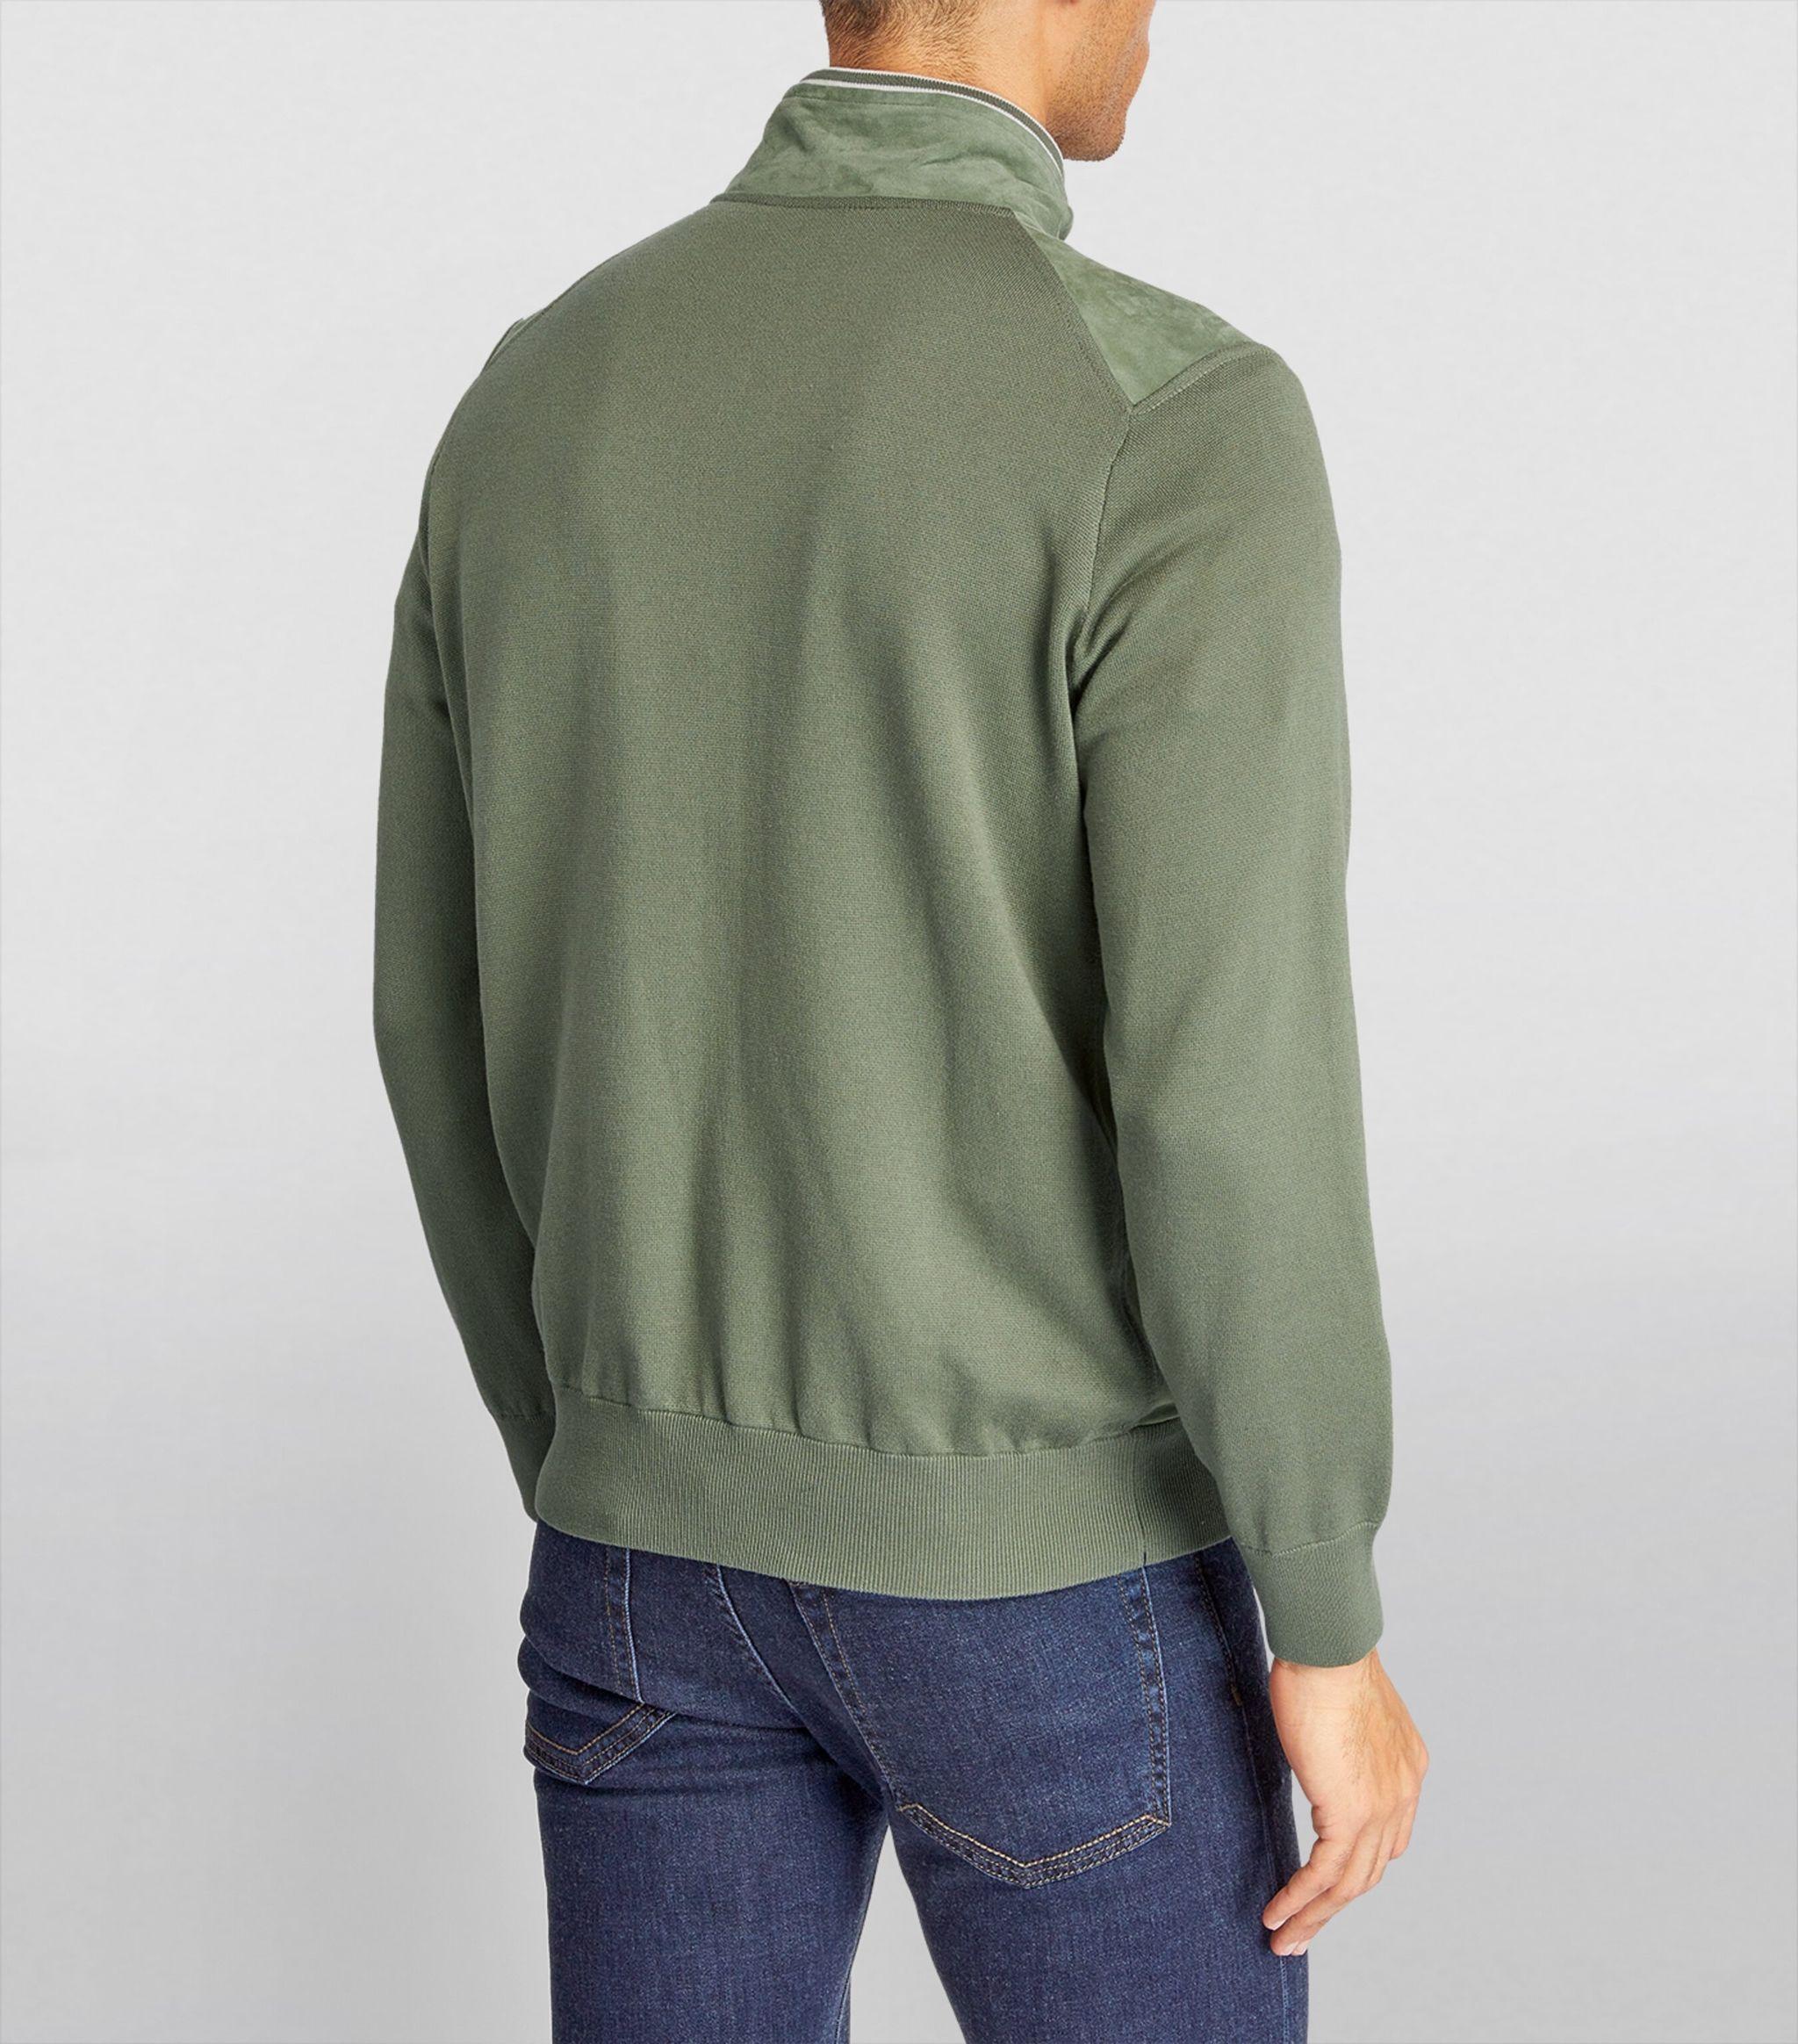 FIORONI CASHMERE Suede-cashmere-blend Bomber Jacket in Green for Men | Lyst